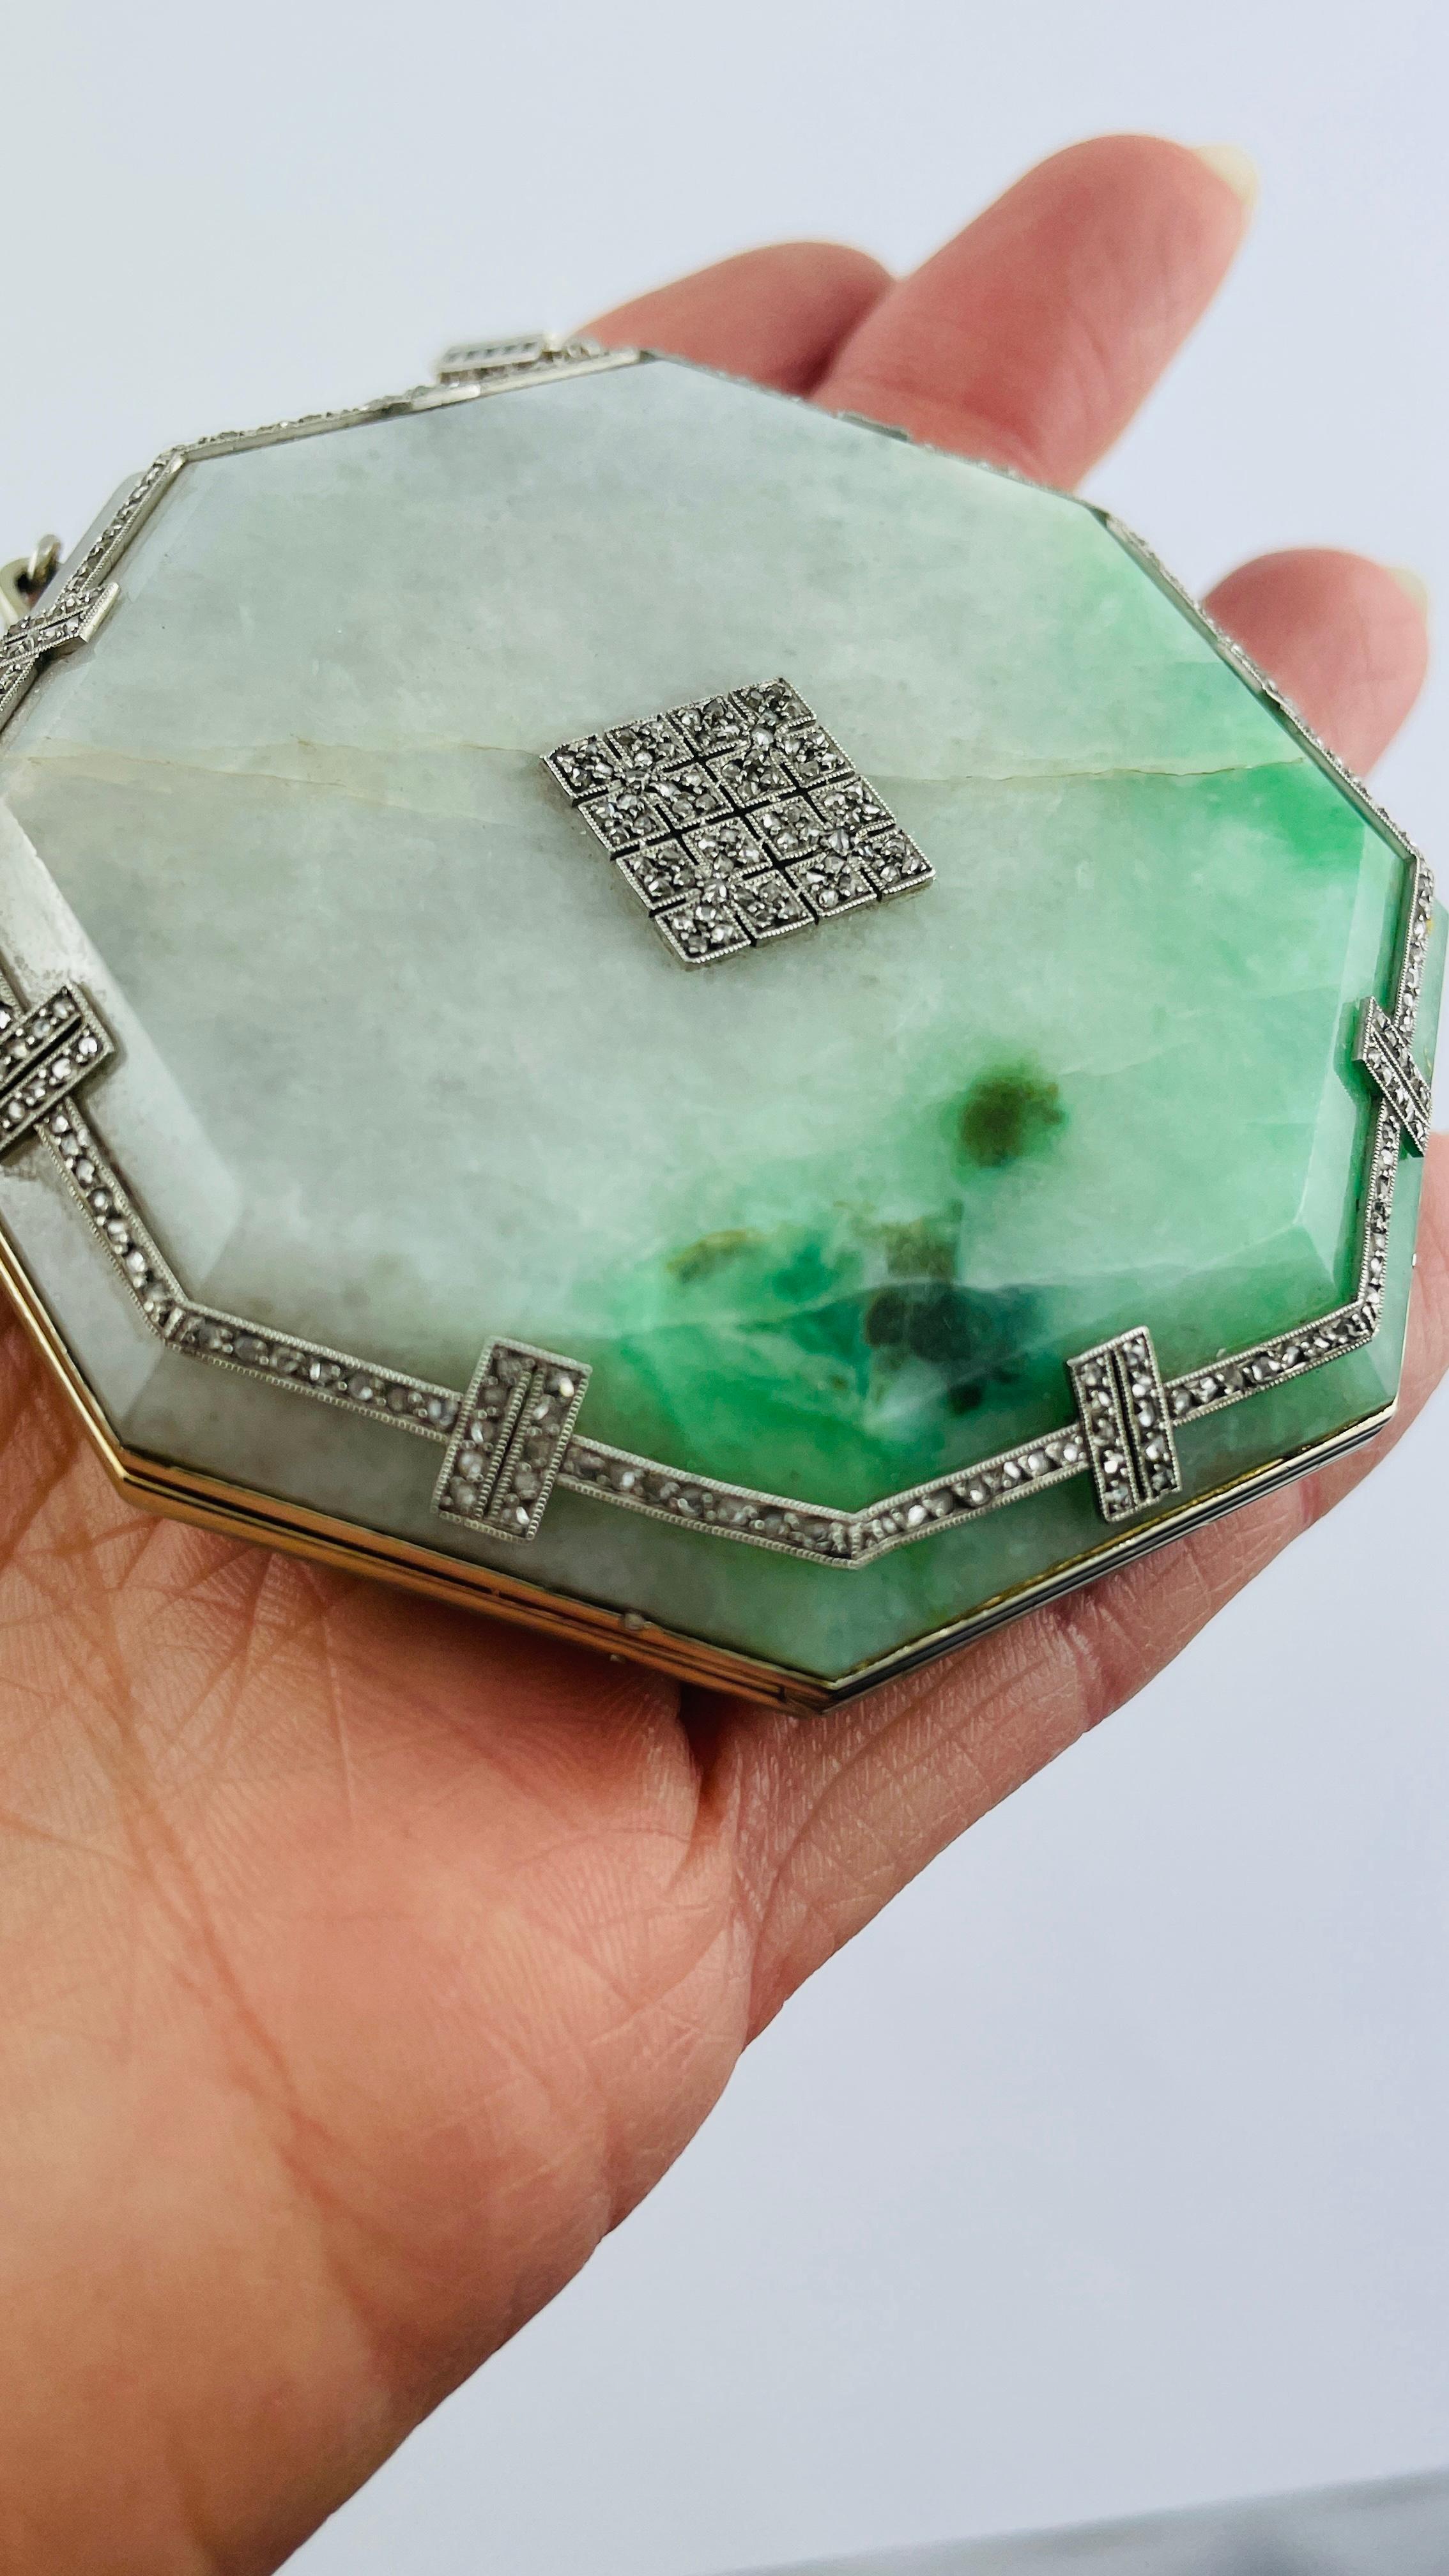 Octagonal powder compact in sculpted jadeite finished in yellow gold, platinum and half-rosette diamonds with a 13cm chain in platinum, natural pearls and half-rosette diamonds, mirror inside, gross approx. G 114.40, length about 6.30. 
Signed